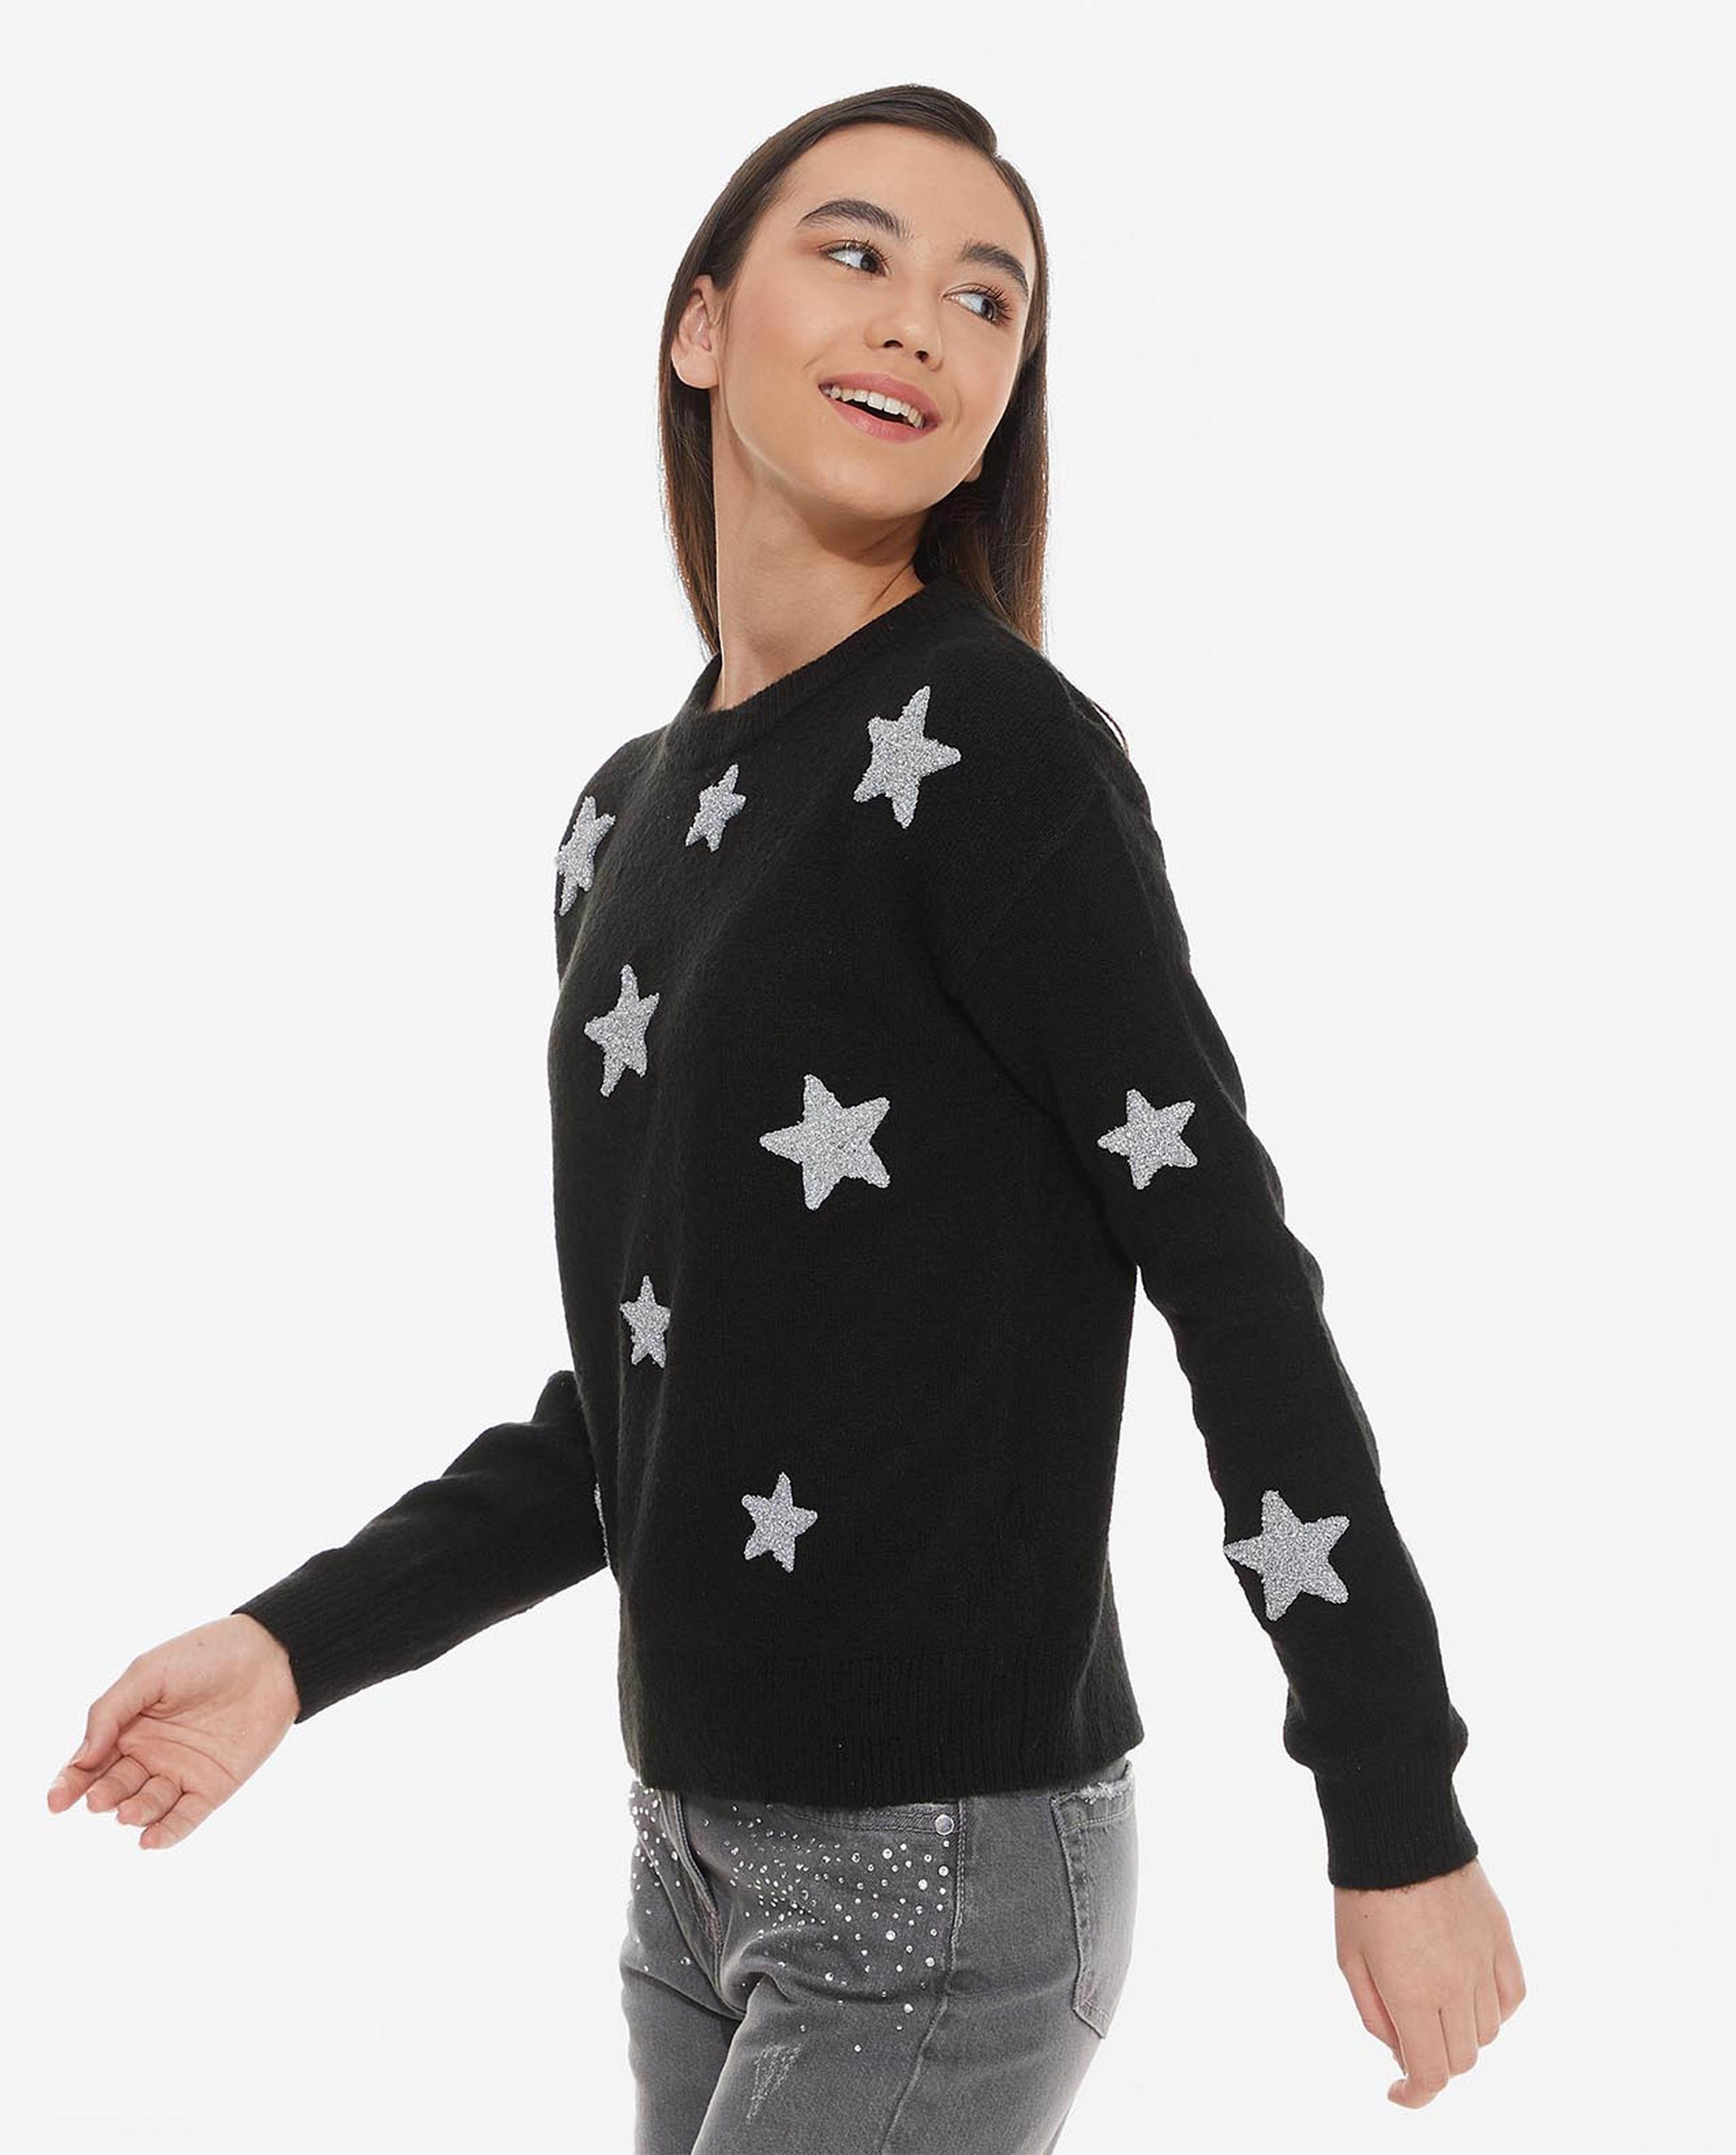 Embellished Sweater with Crew Neck and Long Sleeves